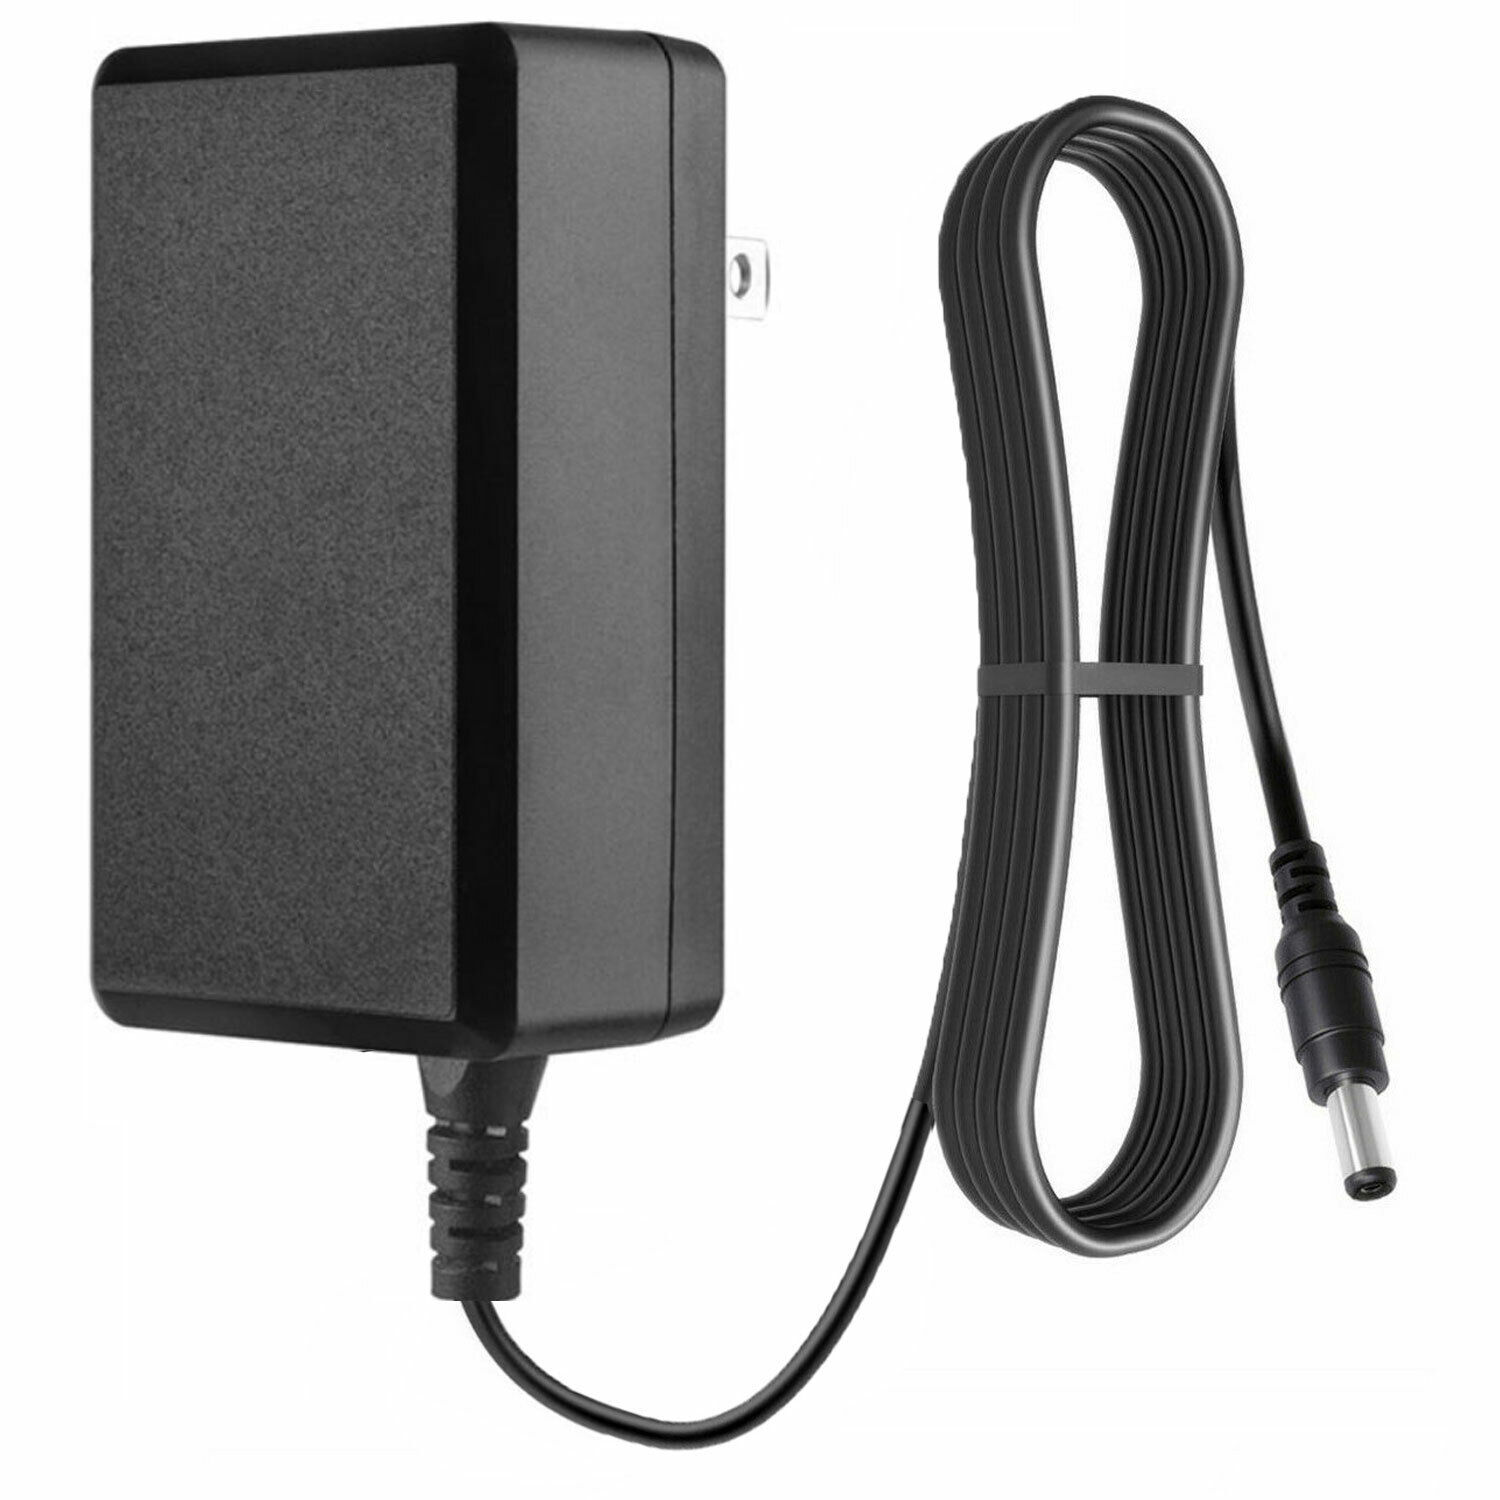 AC Adapter Charger for Fairway Electronic WN20U-050 Switching Power Supply PSU Specifications: Type: AC to DC Standard